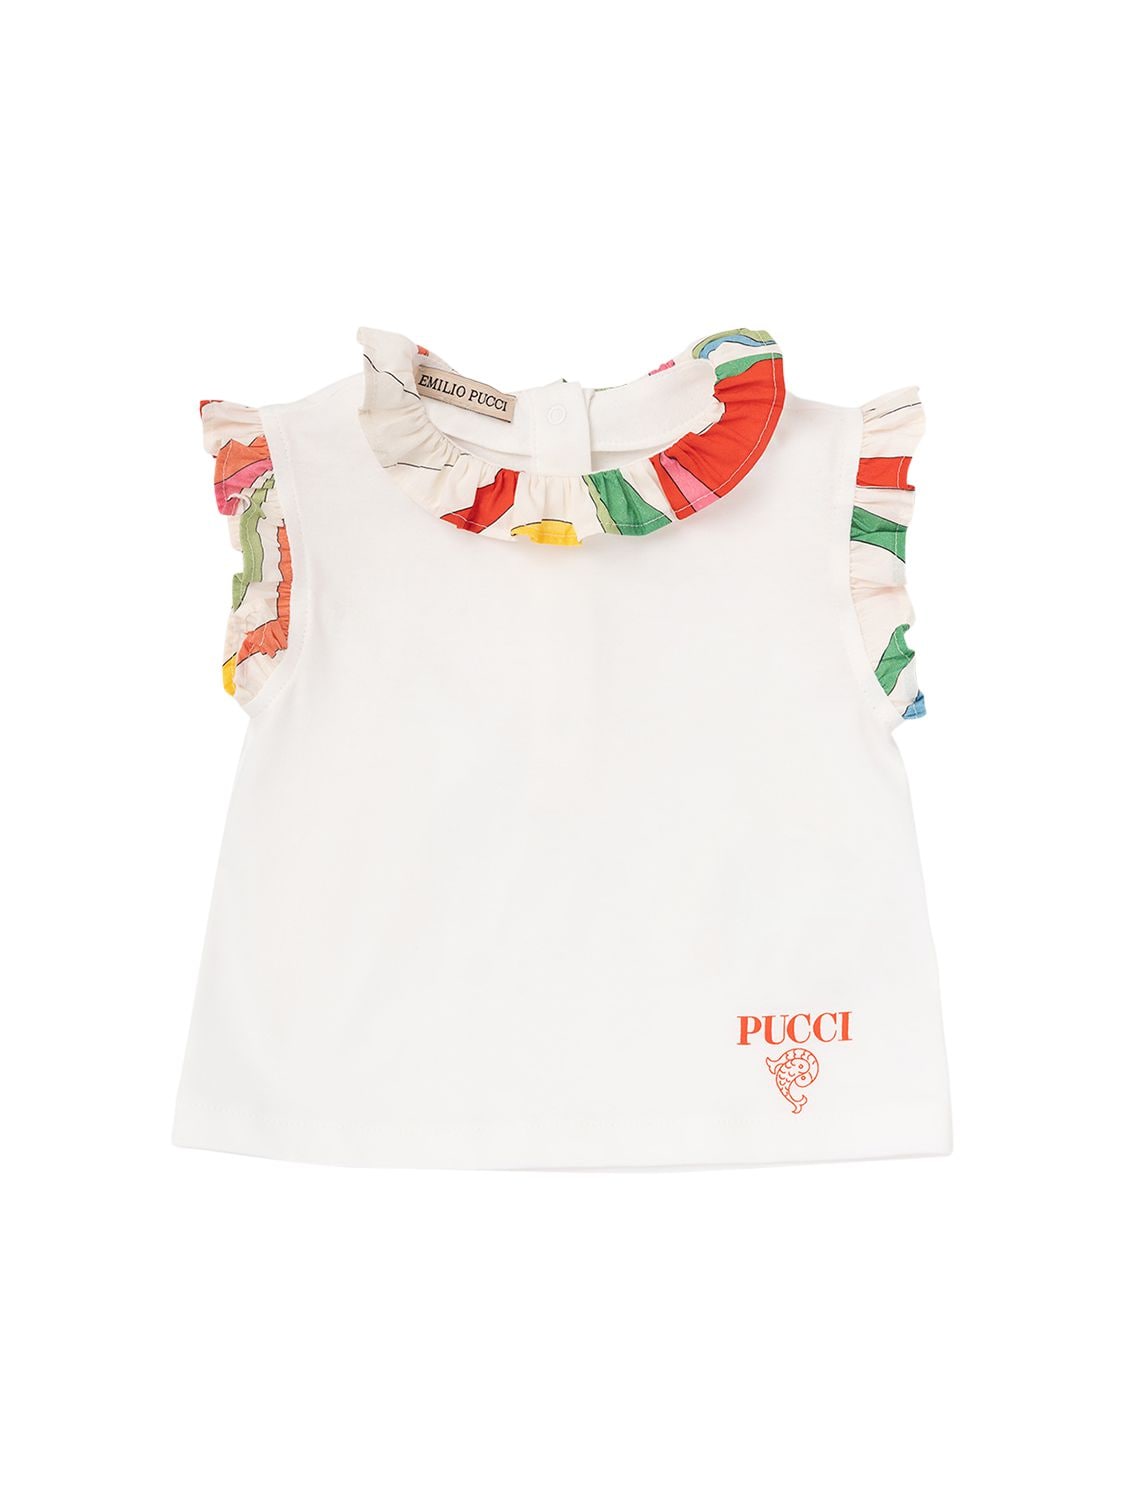 Pucci Babies' Organic Cotton Jersey T-shirt In White